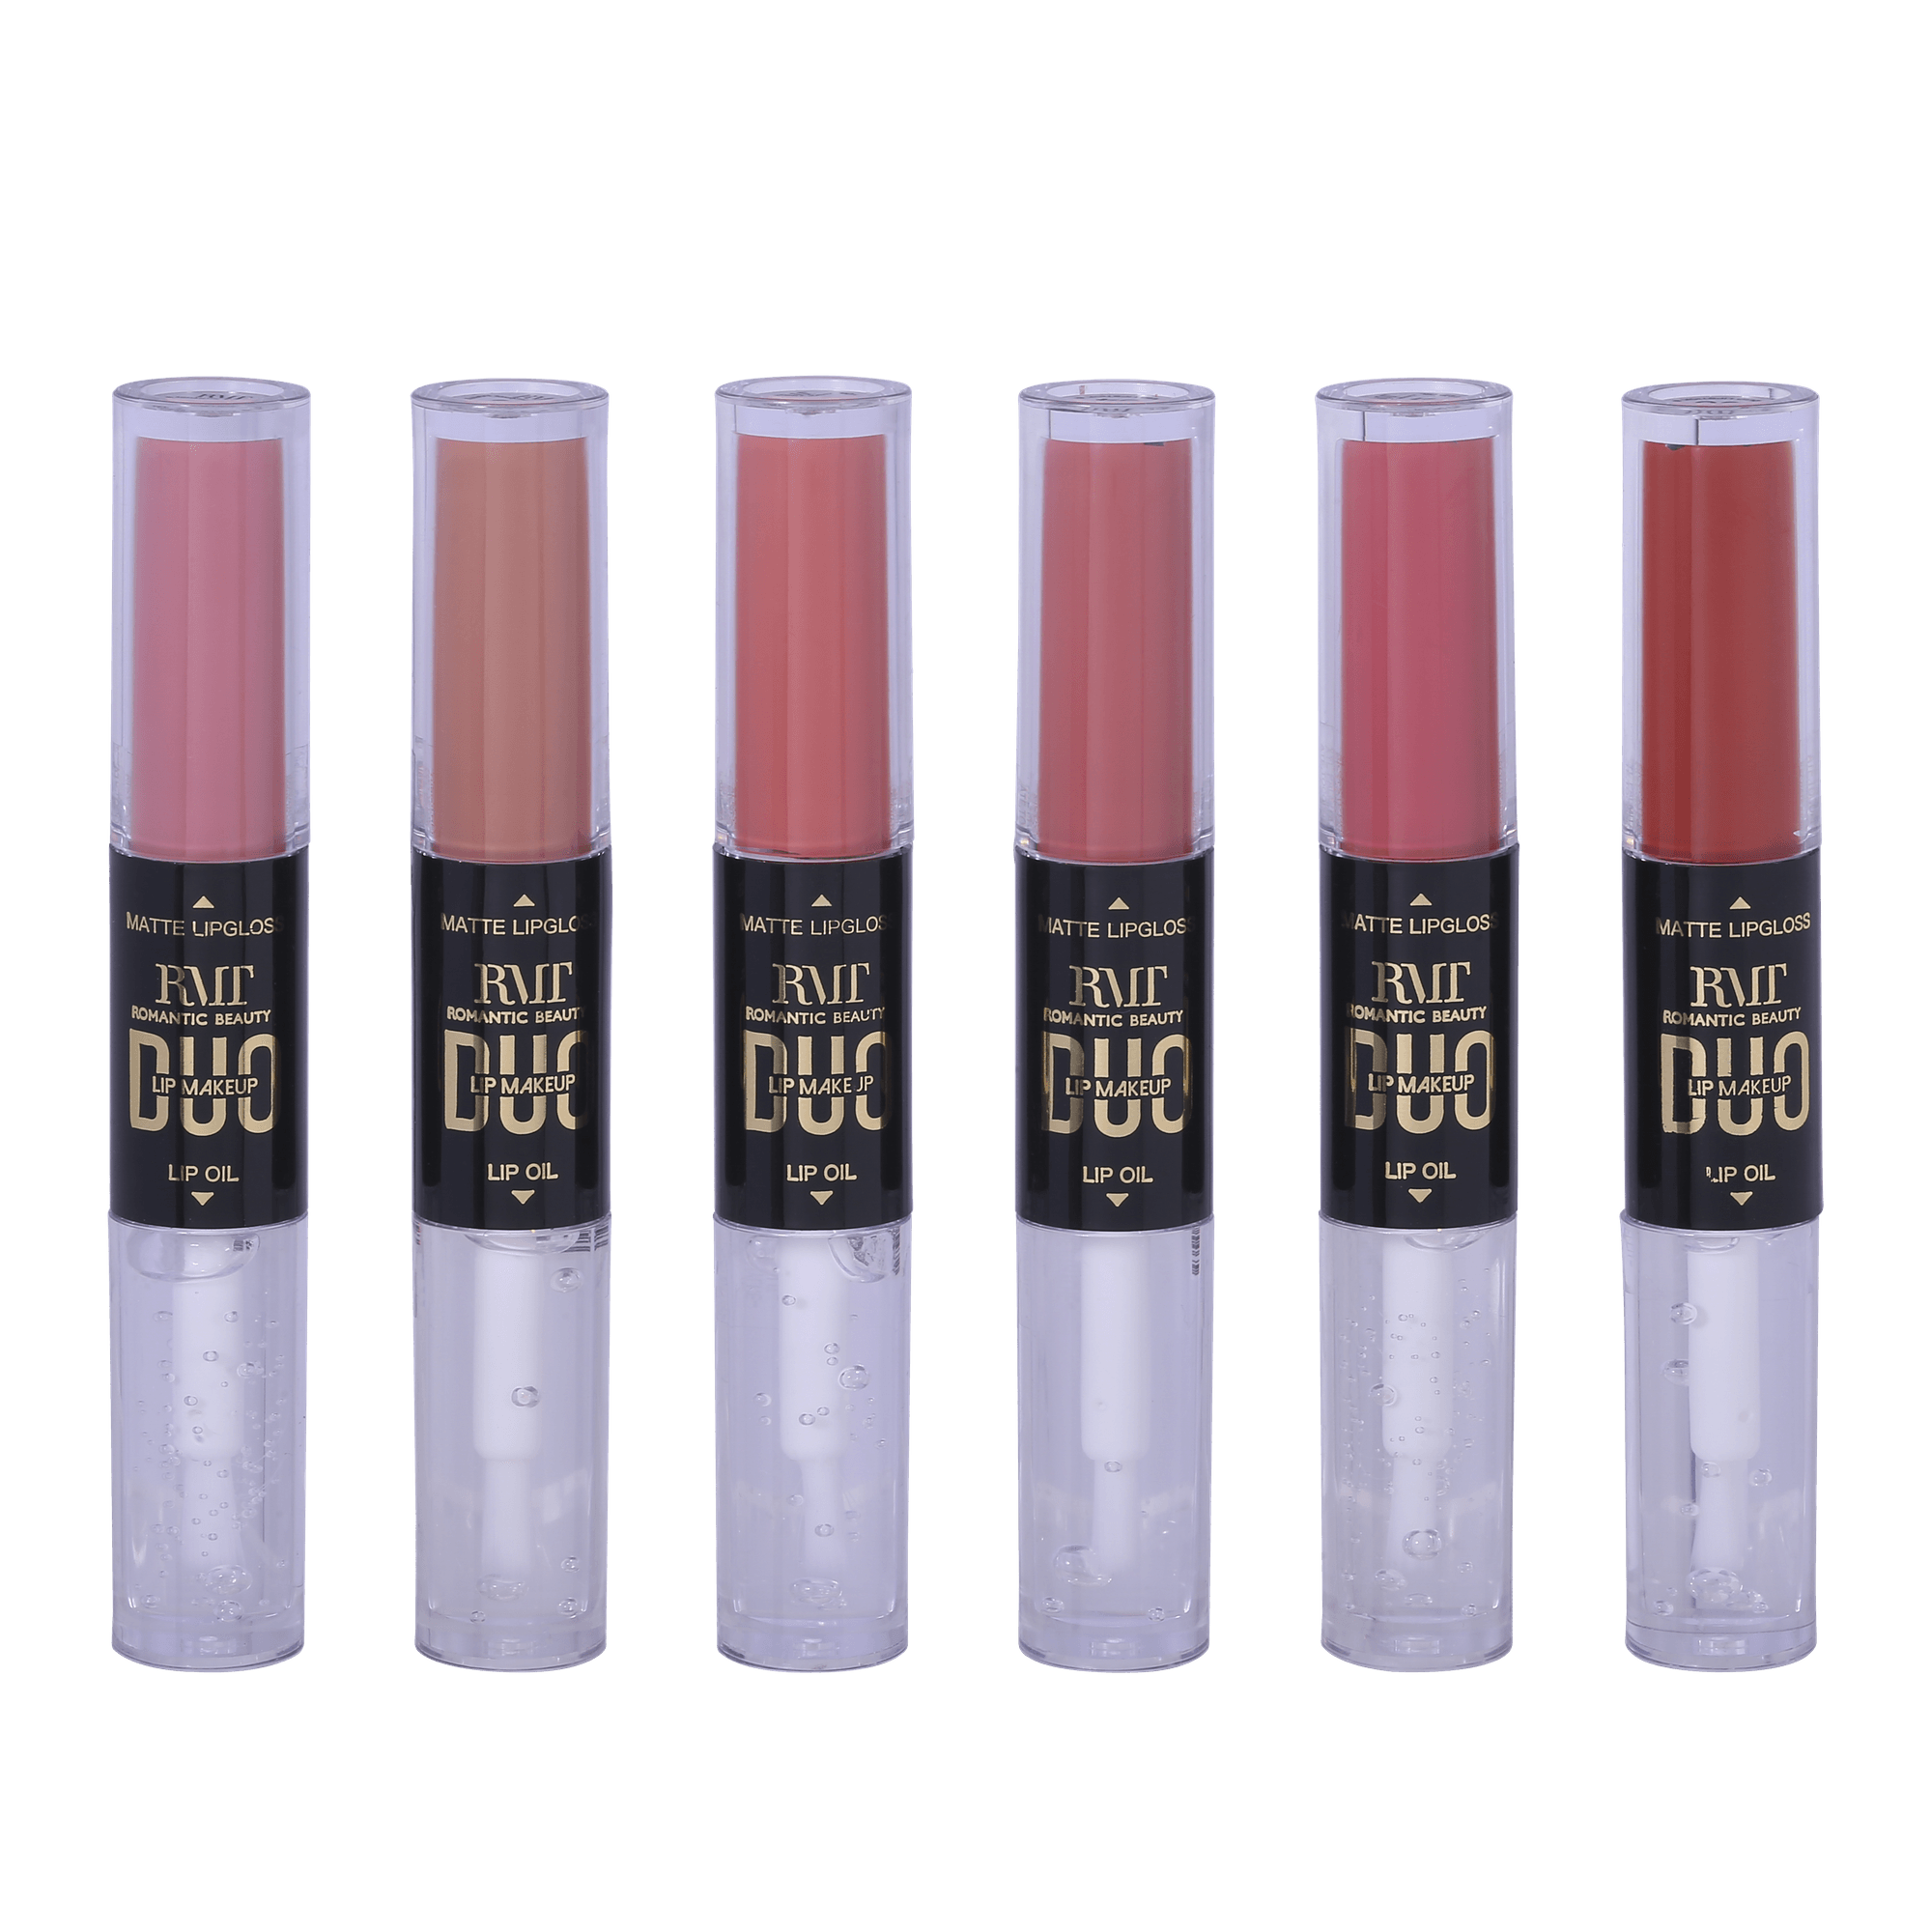 Pack 24 unidades MATTE LIPGLOSS AND LIP OIL